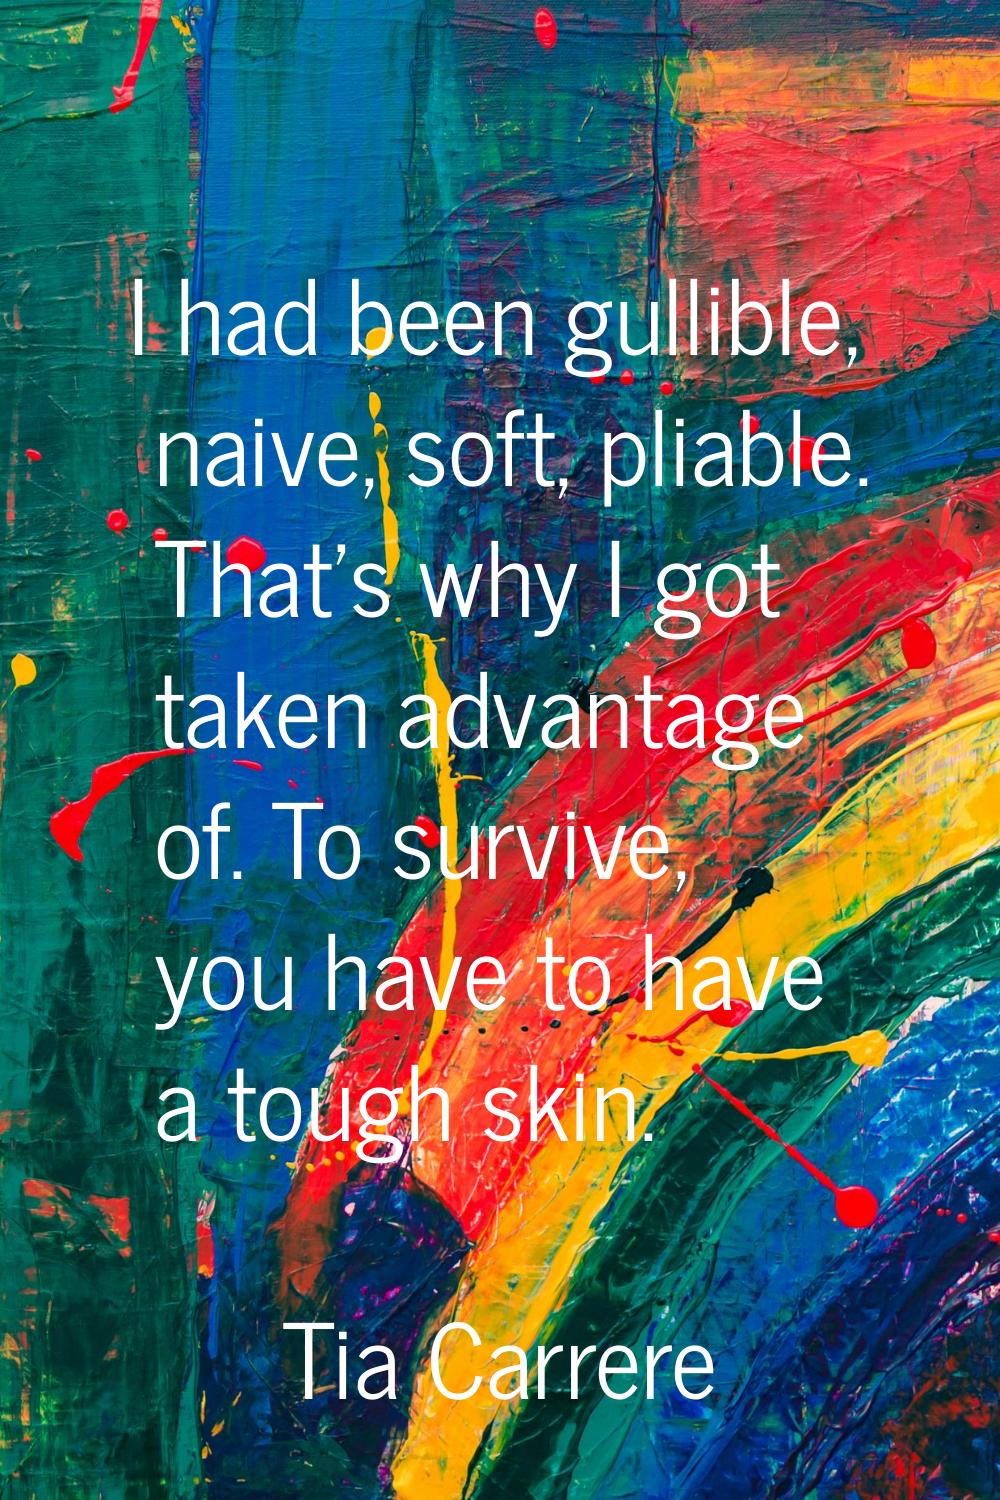 I had been gullible, naive, soft, pliable. That's why I got taken advantage of. To survive, you hav